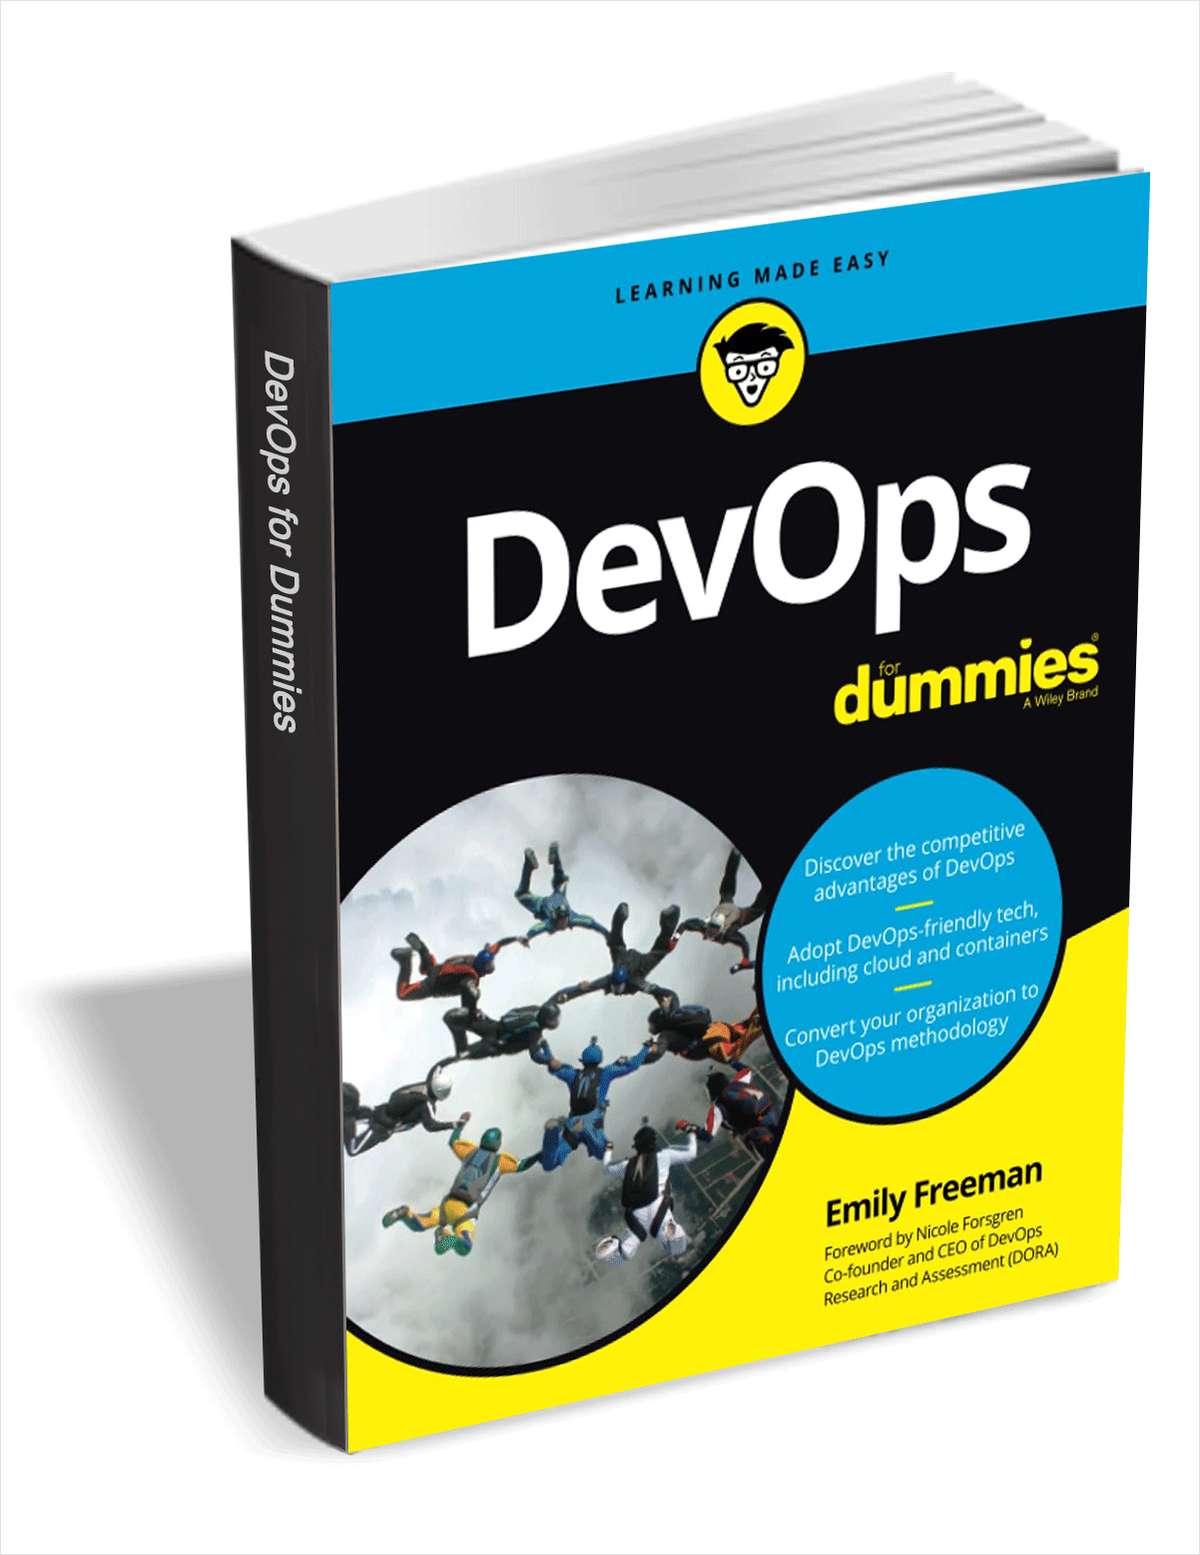 Obtain ‘DevOps For Dummies’ for Free (valued at $19)